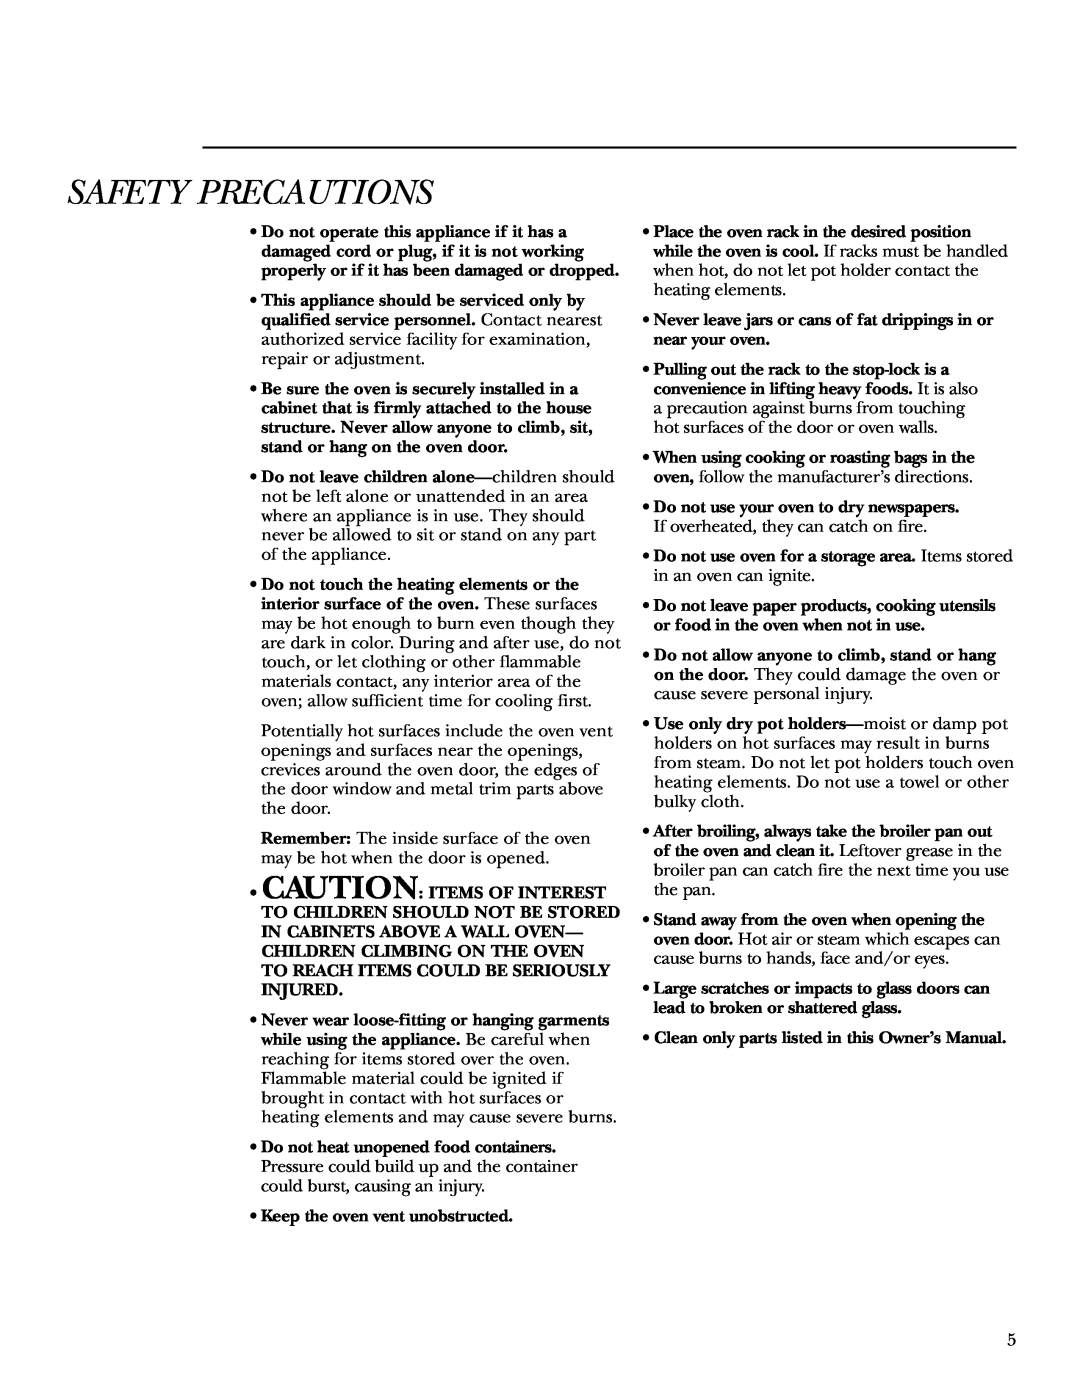 GE ZET3058, ZET3038 owner manual Safety Precautions, Keep the oven vent unobstructed 